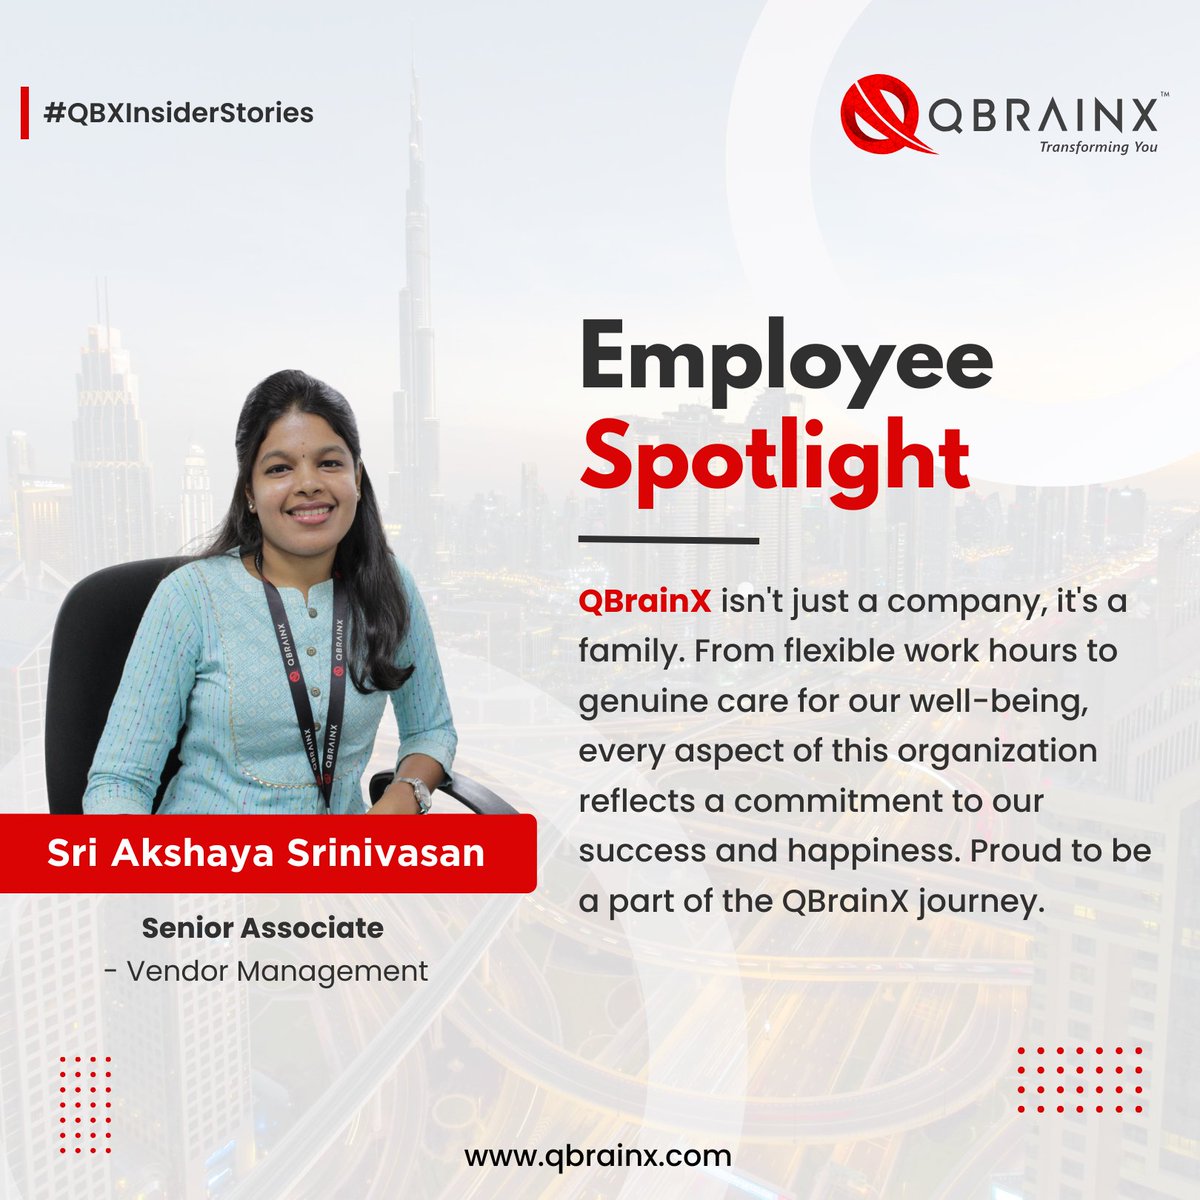 Gain insight into the core values of QBrainX from the voices of our team members! Join us as Akshaya Srinivasan reflects on her inspiring journey as a valued member of QBrainX.
#QBrainX #EmployeeInsights #Employeetestimonial #QBXInsiderStories #WorkplaceCommunity #QBX